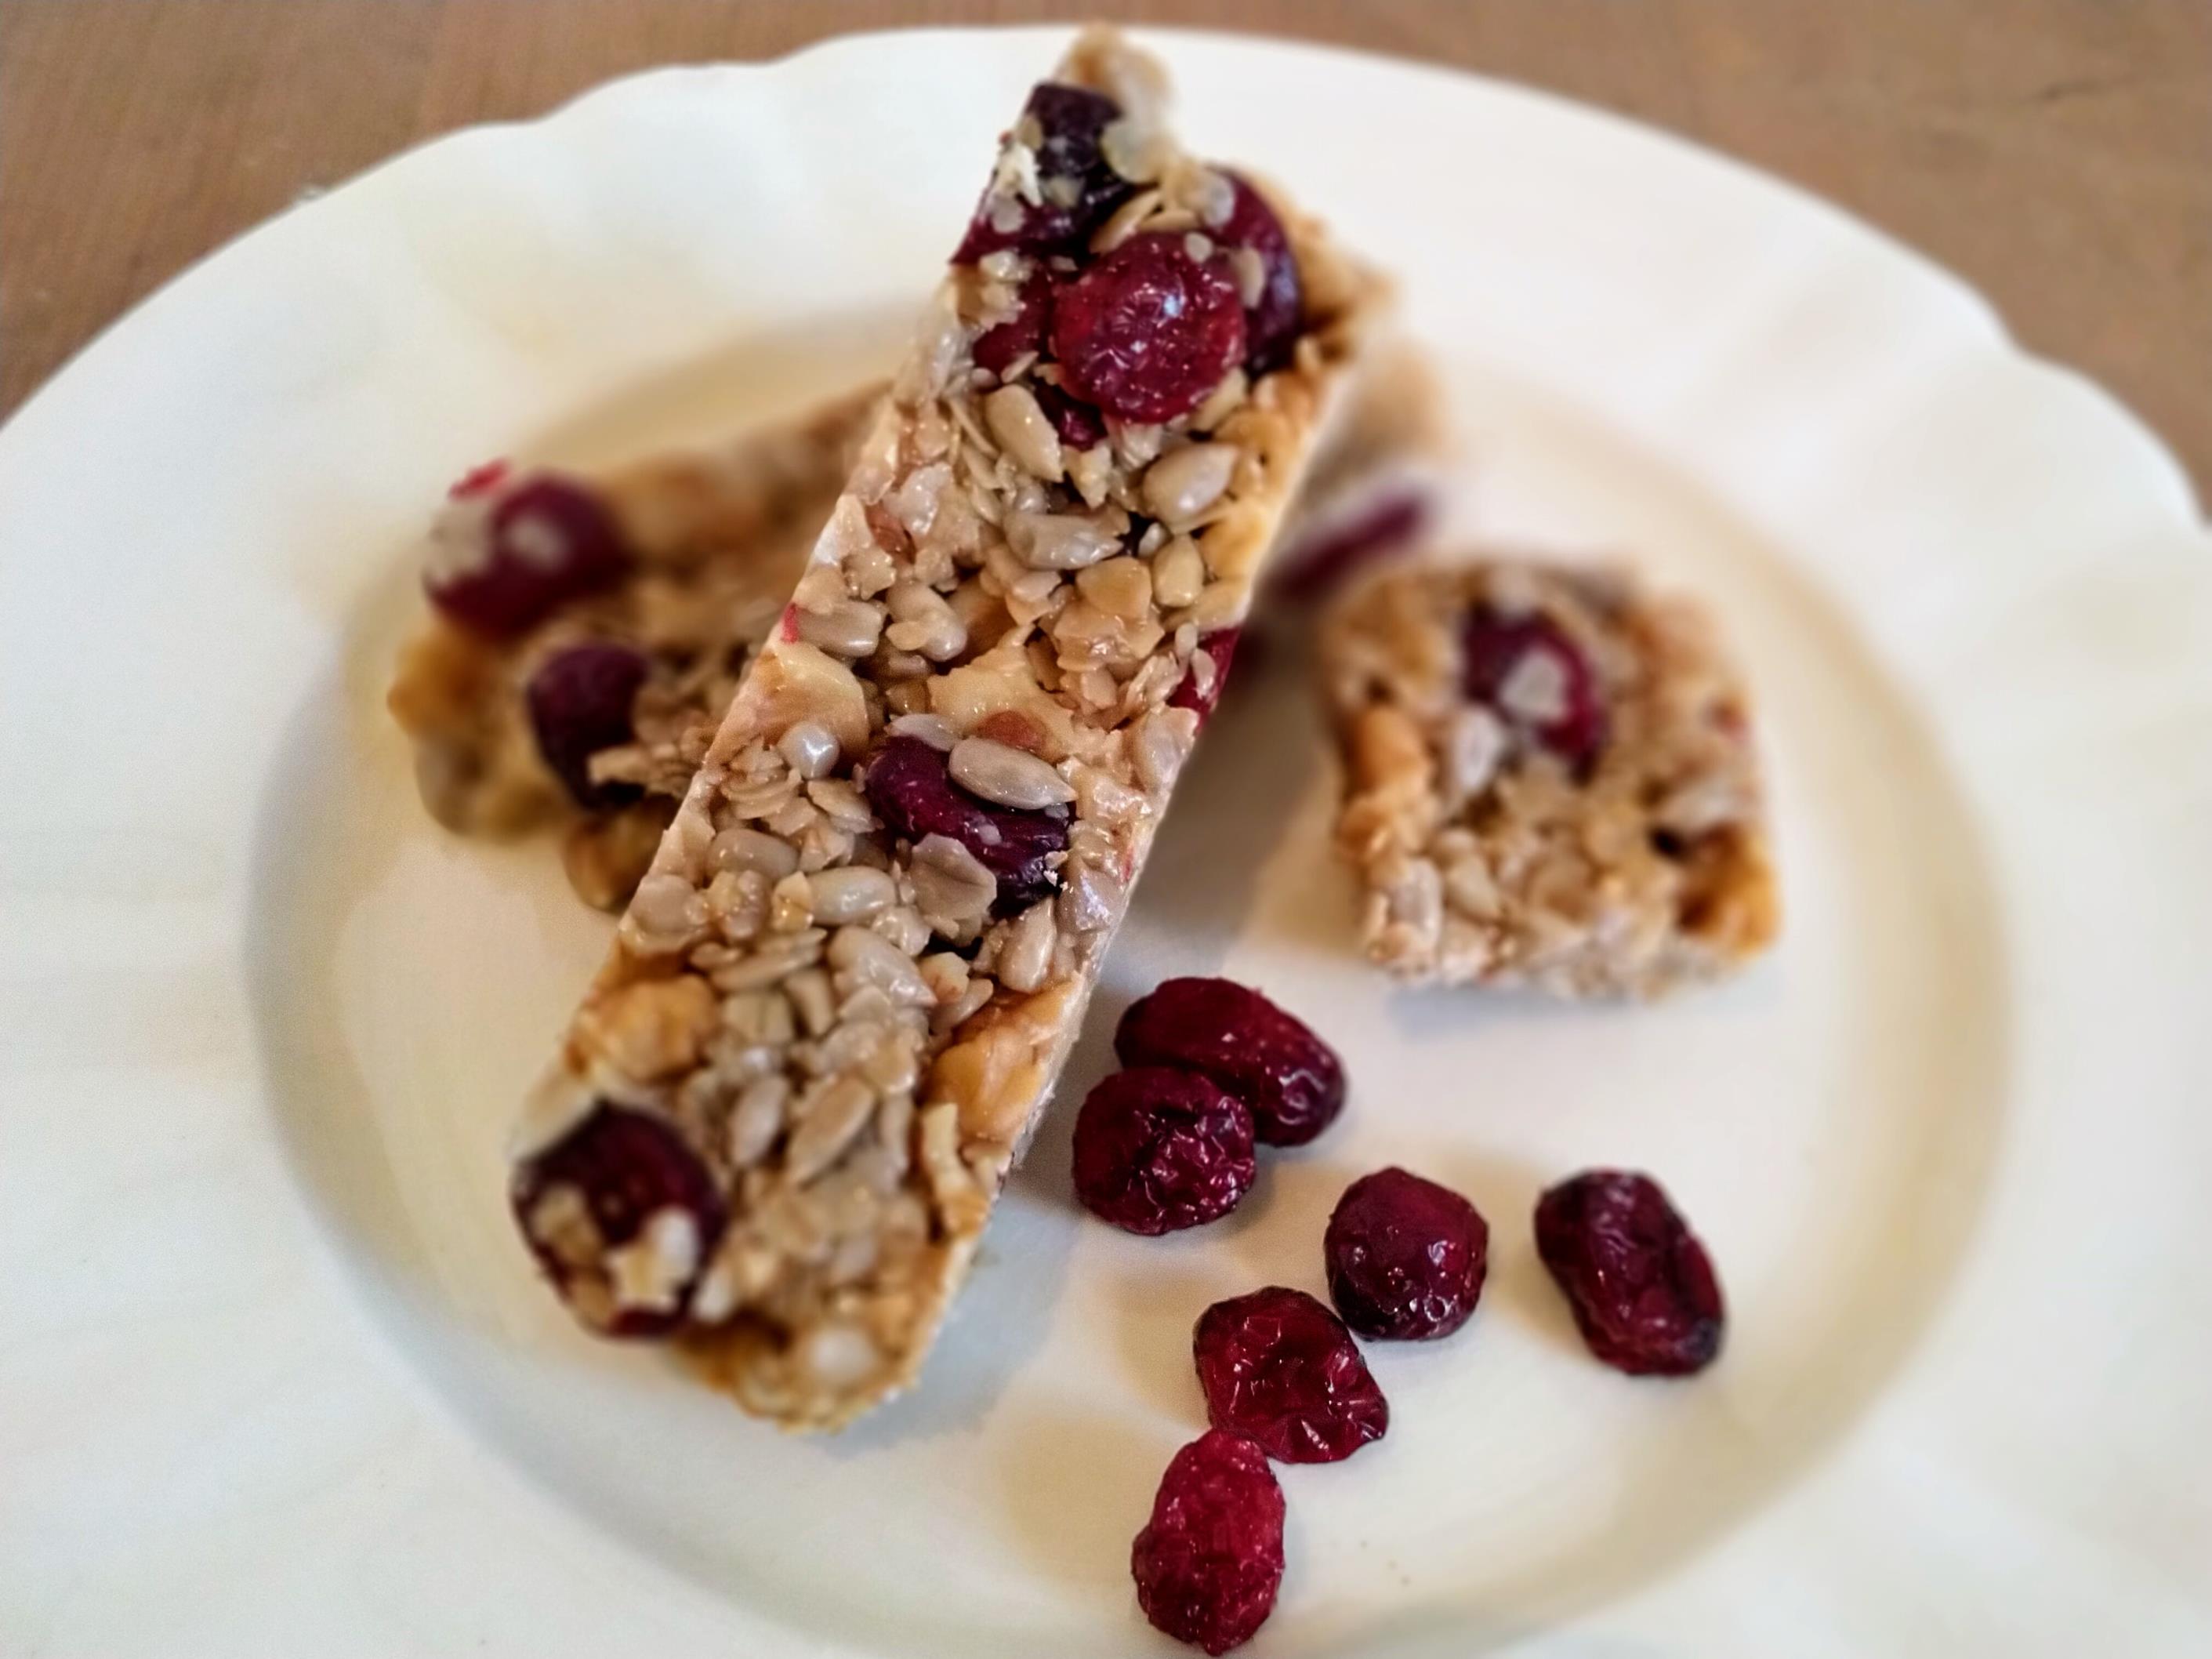 Guilt Free Snacks by SIS Spa in Spain; cranberry granola bar